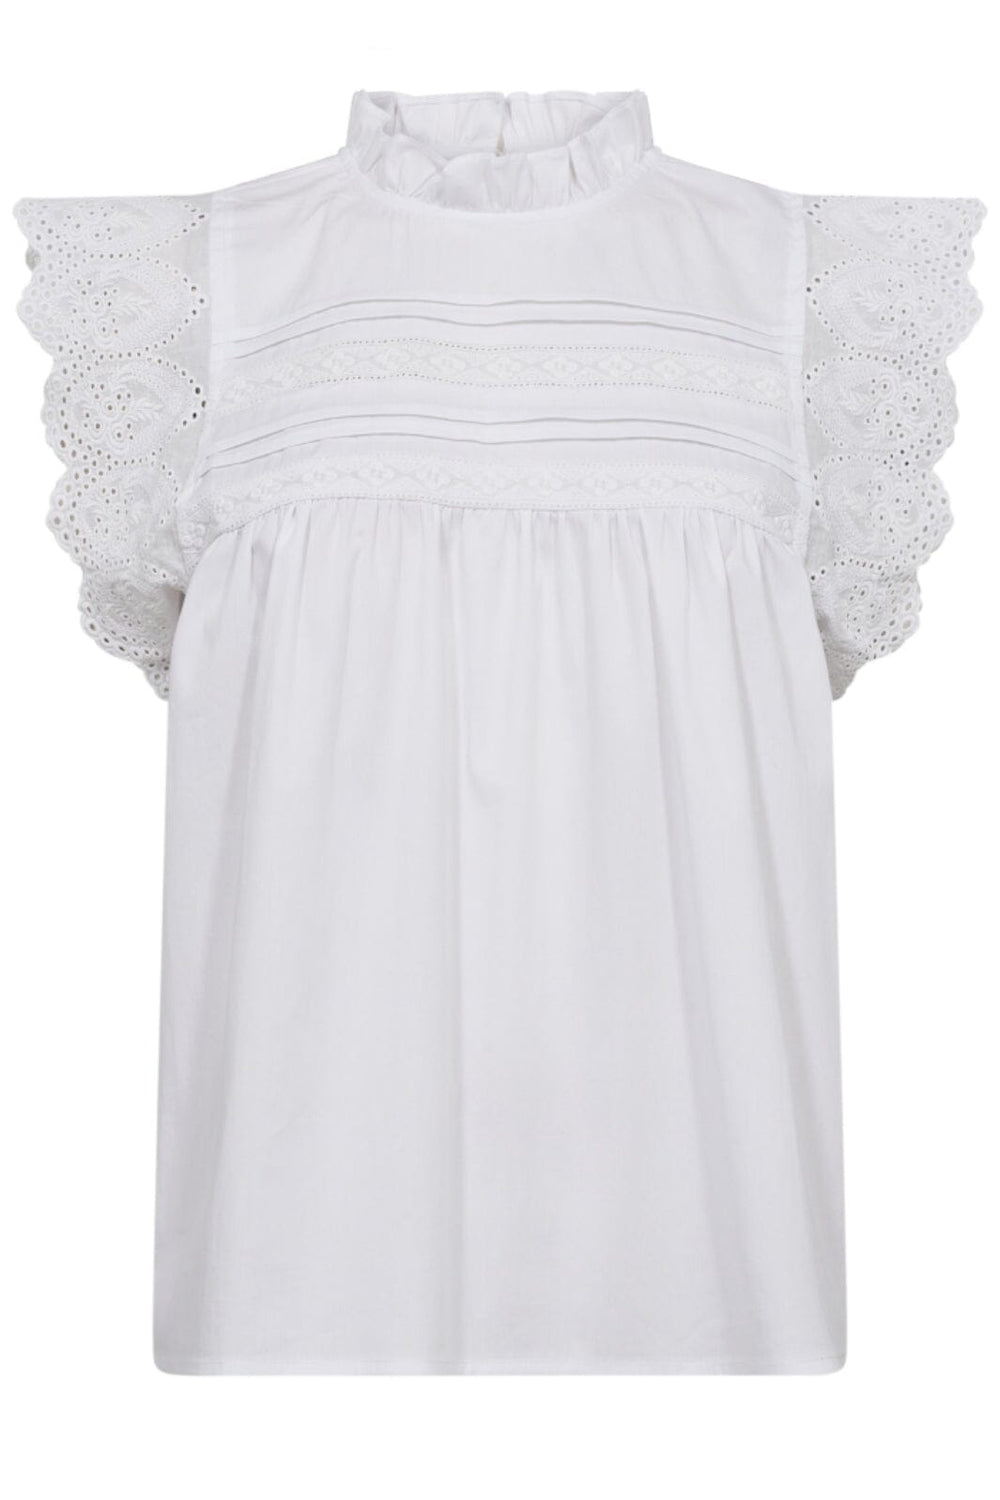 Co´couture - Tiacc Anglaise Top 35506 - 4000 White Skjorter 